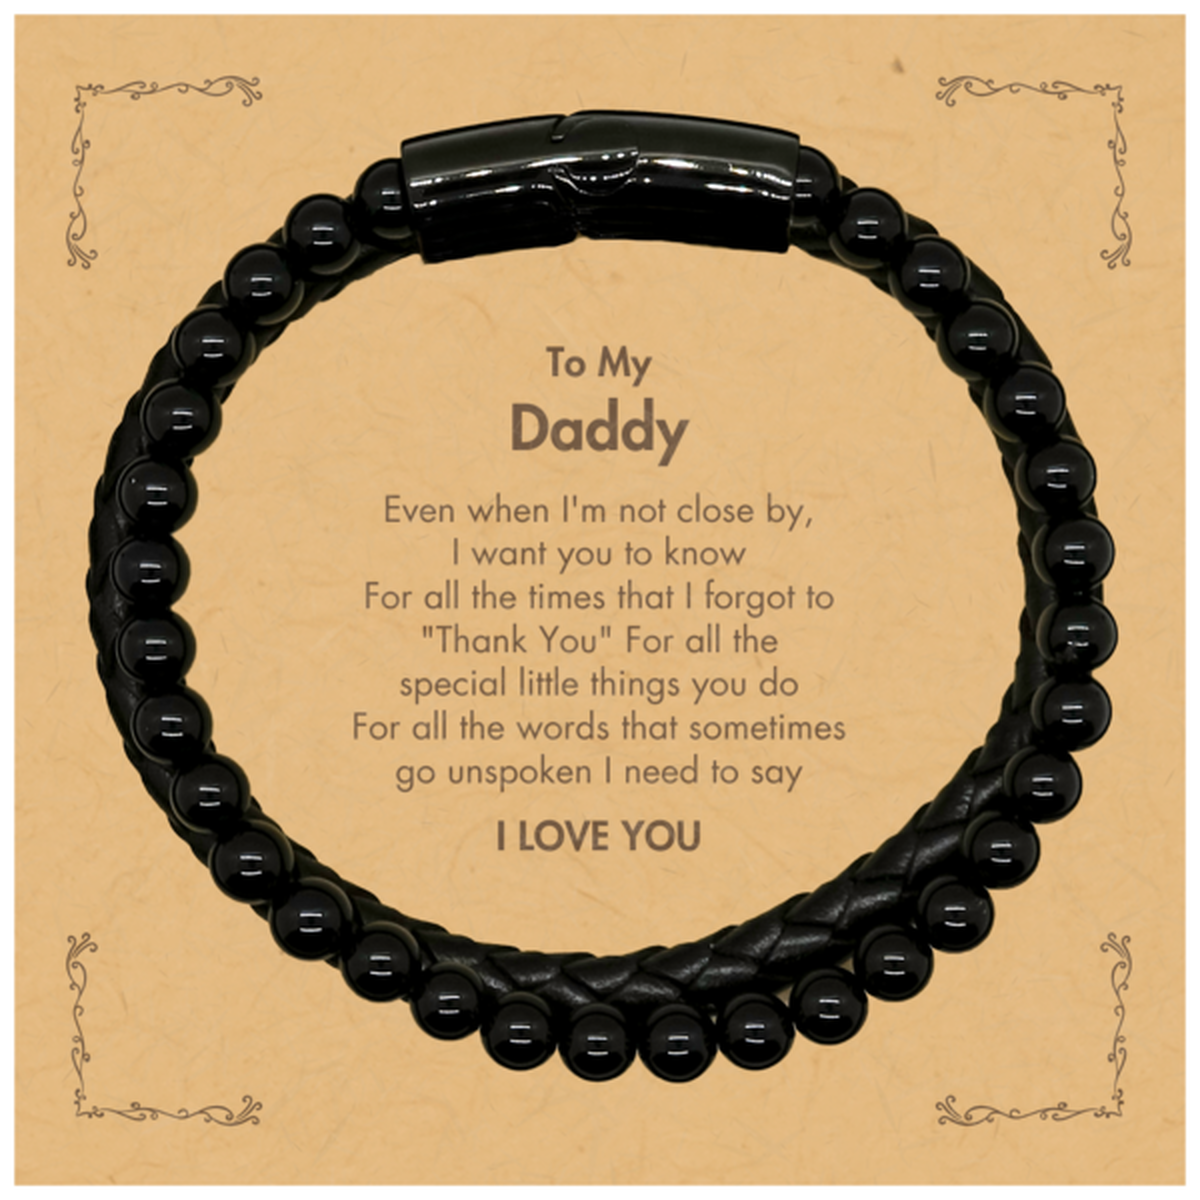 Thank You Gifts for Daddy, Keepsake Stone Leather Bracelets Gifts for Daddy Birthday Mother's day Father's Day Daddy For all the words That sometimes go unspoken I need to say I LOVE YOU